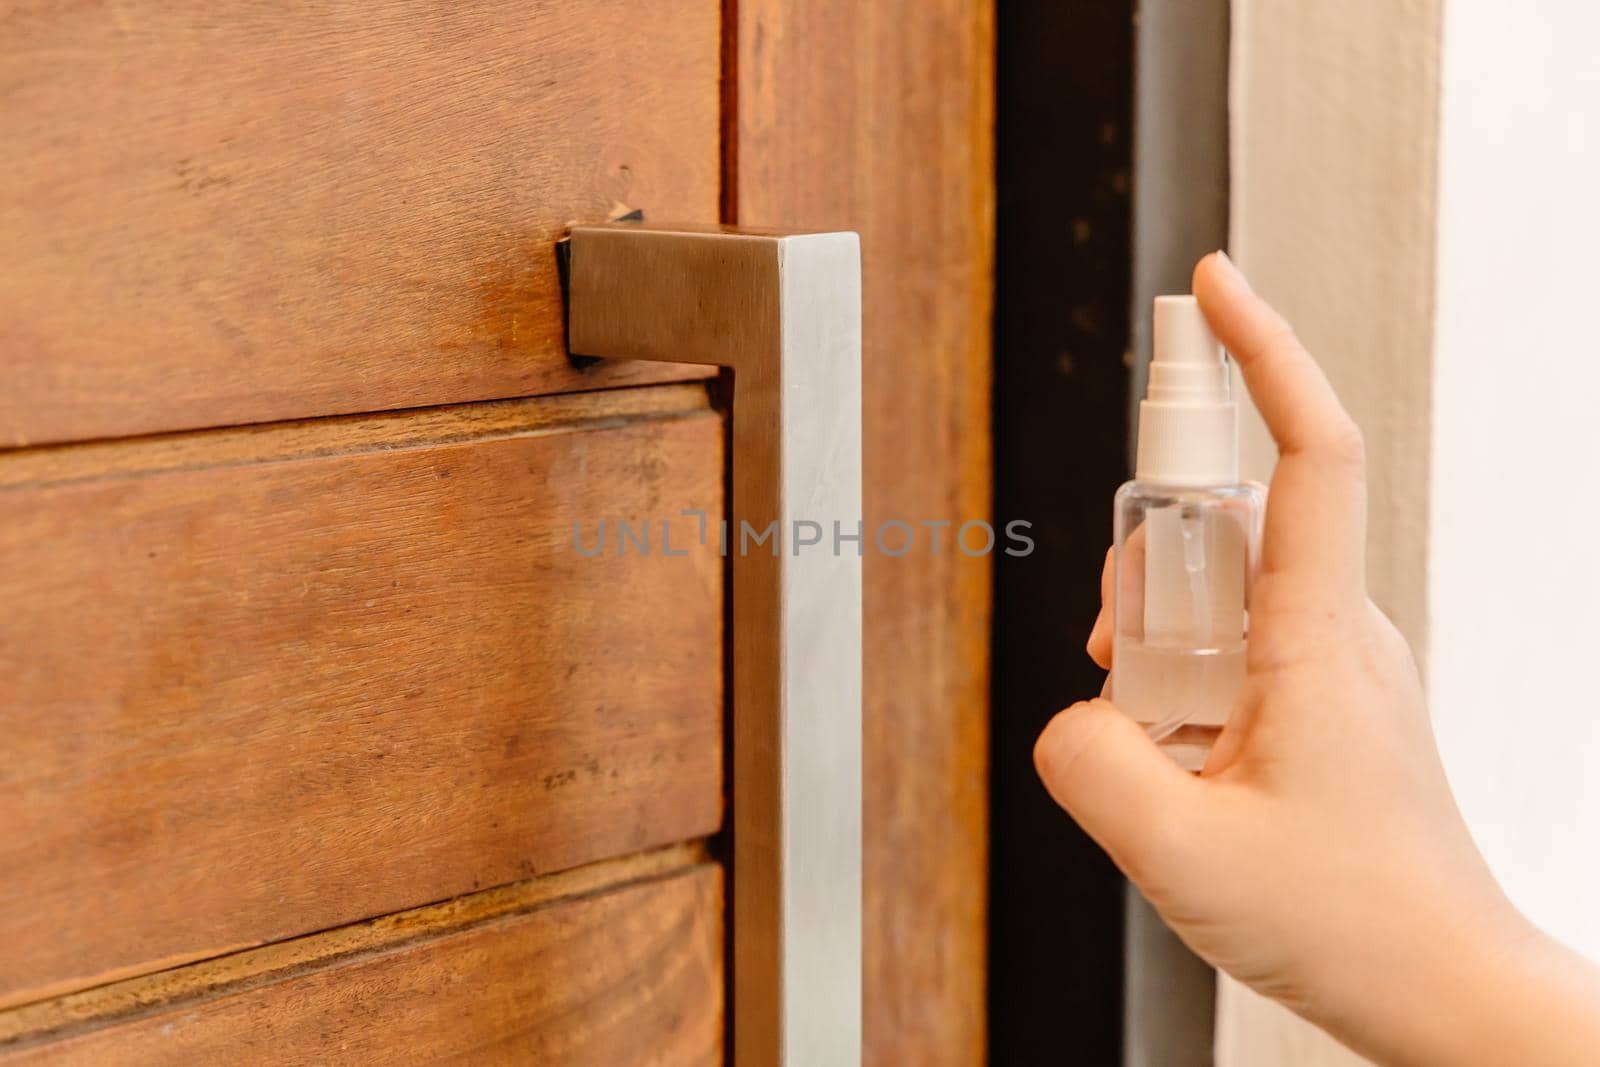 Closeup people using alcohol disinfectant spray cleaning door handle for preventing spreading of virus or germ when touching.